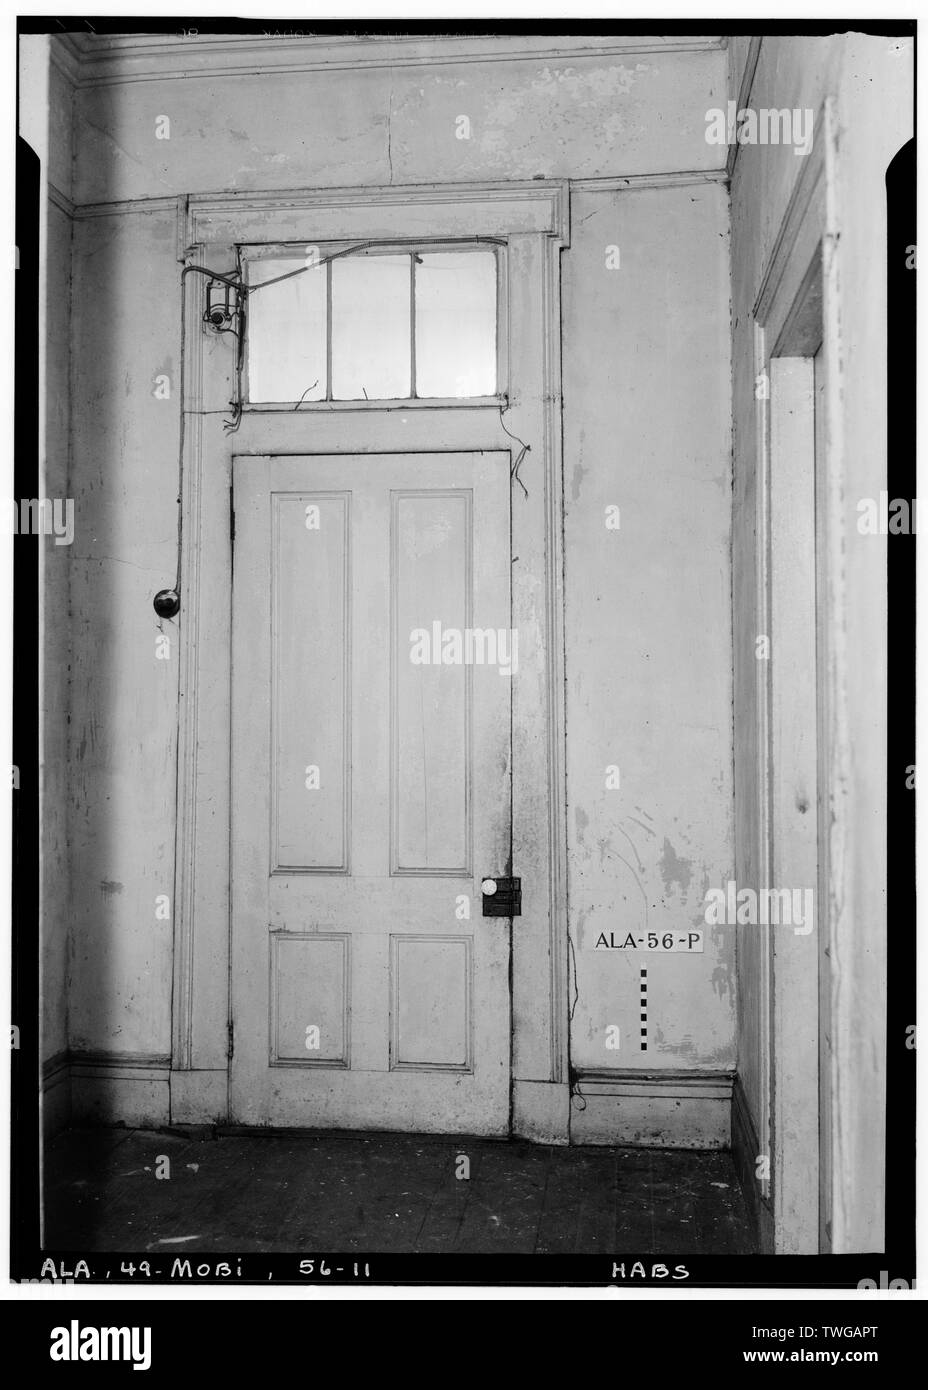 Historic American Buildings Survey E. W. Russell, Photographer, March 24, 1936 REAR DOOR IN HALL, 1st FLOOR - Horta-Semmes House and Fence, 802 Government Street, Mobile, Mobile County, AL Stock Photo